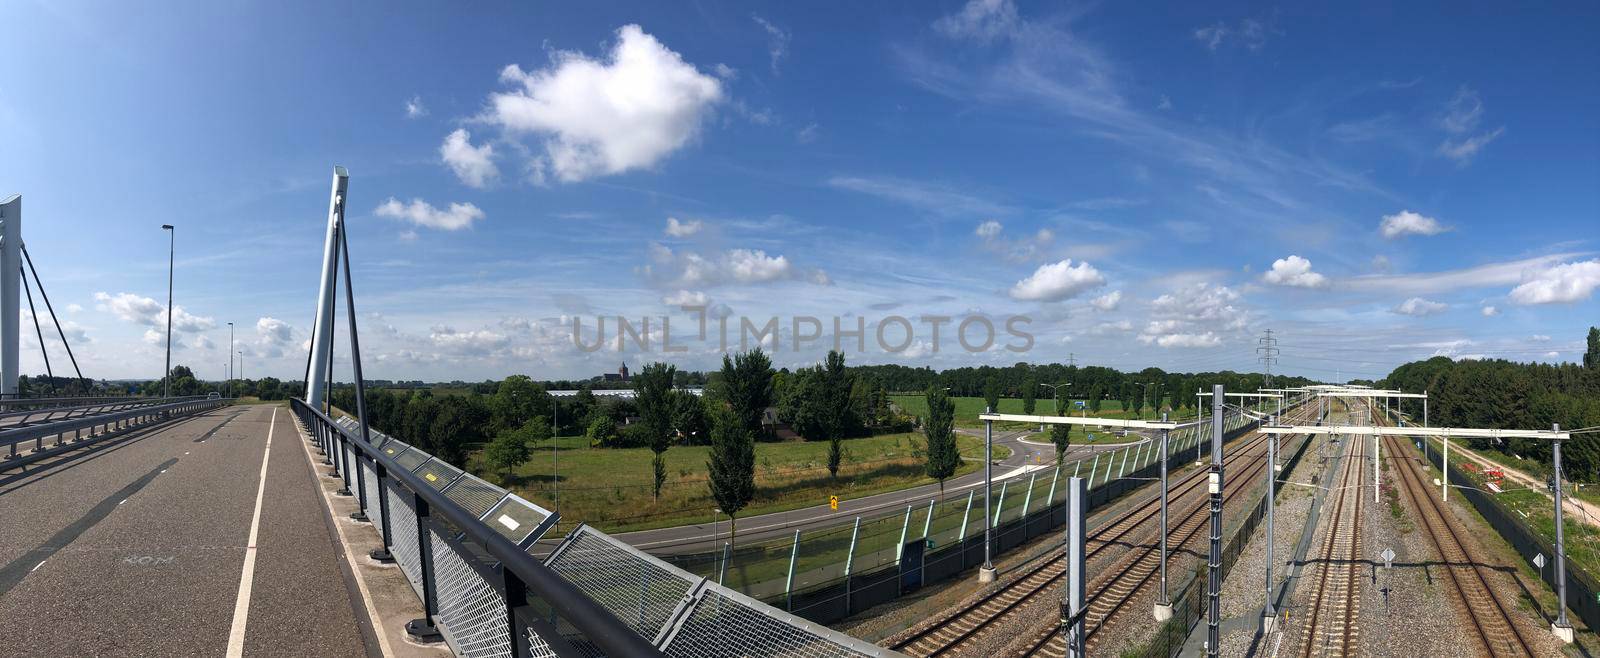 Panorama from a bridge over a train track in Zevenaar by traveltelly